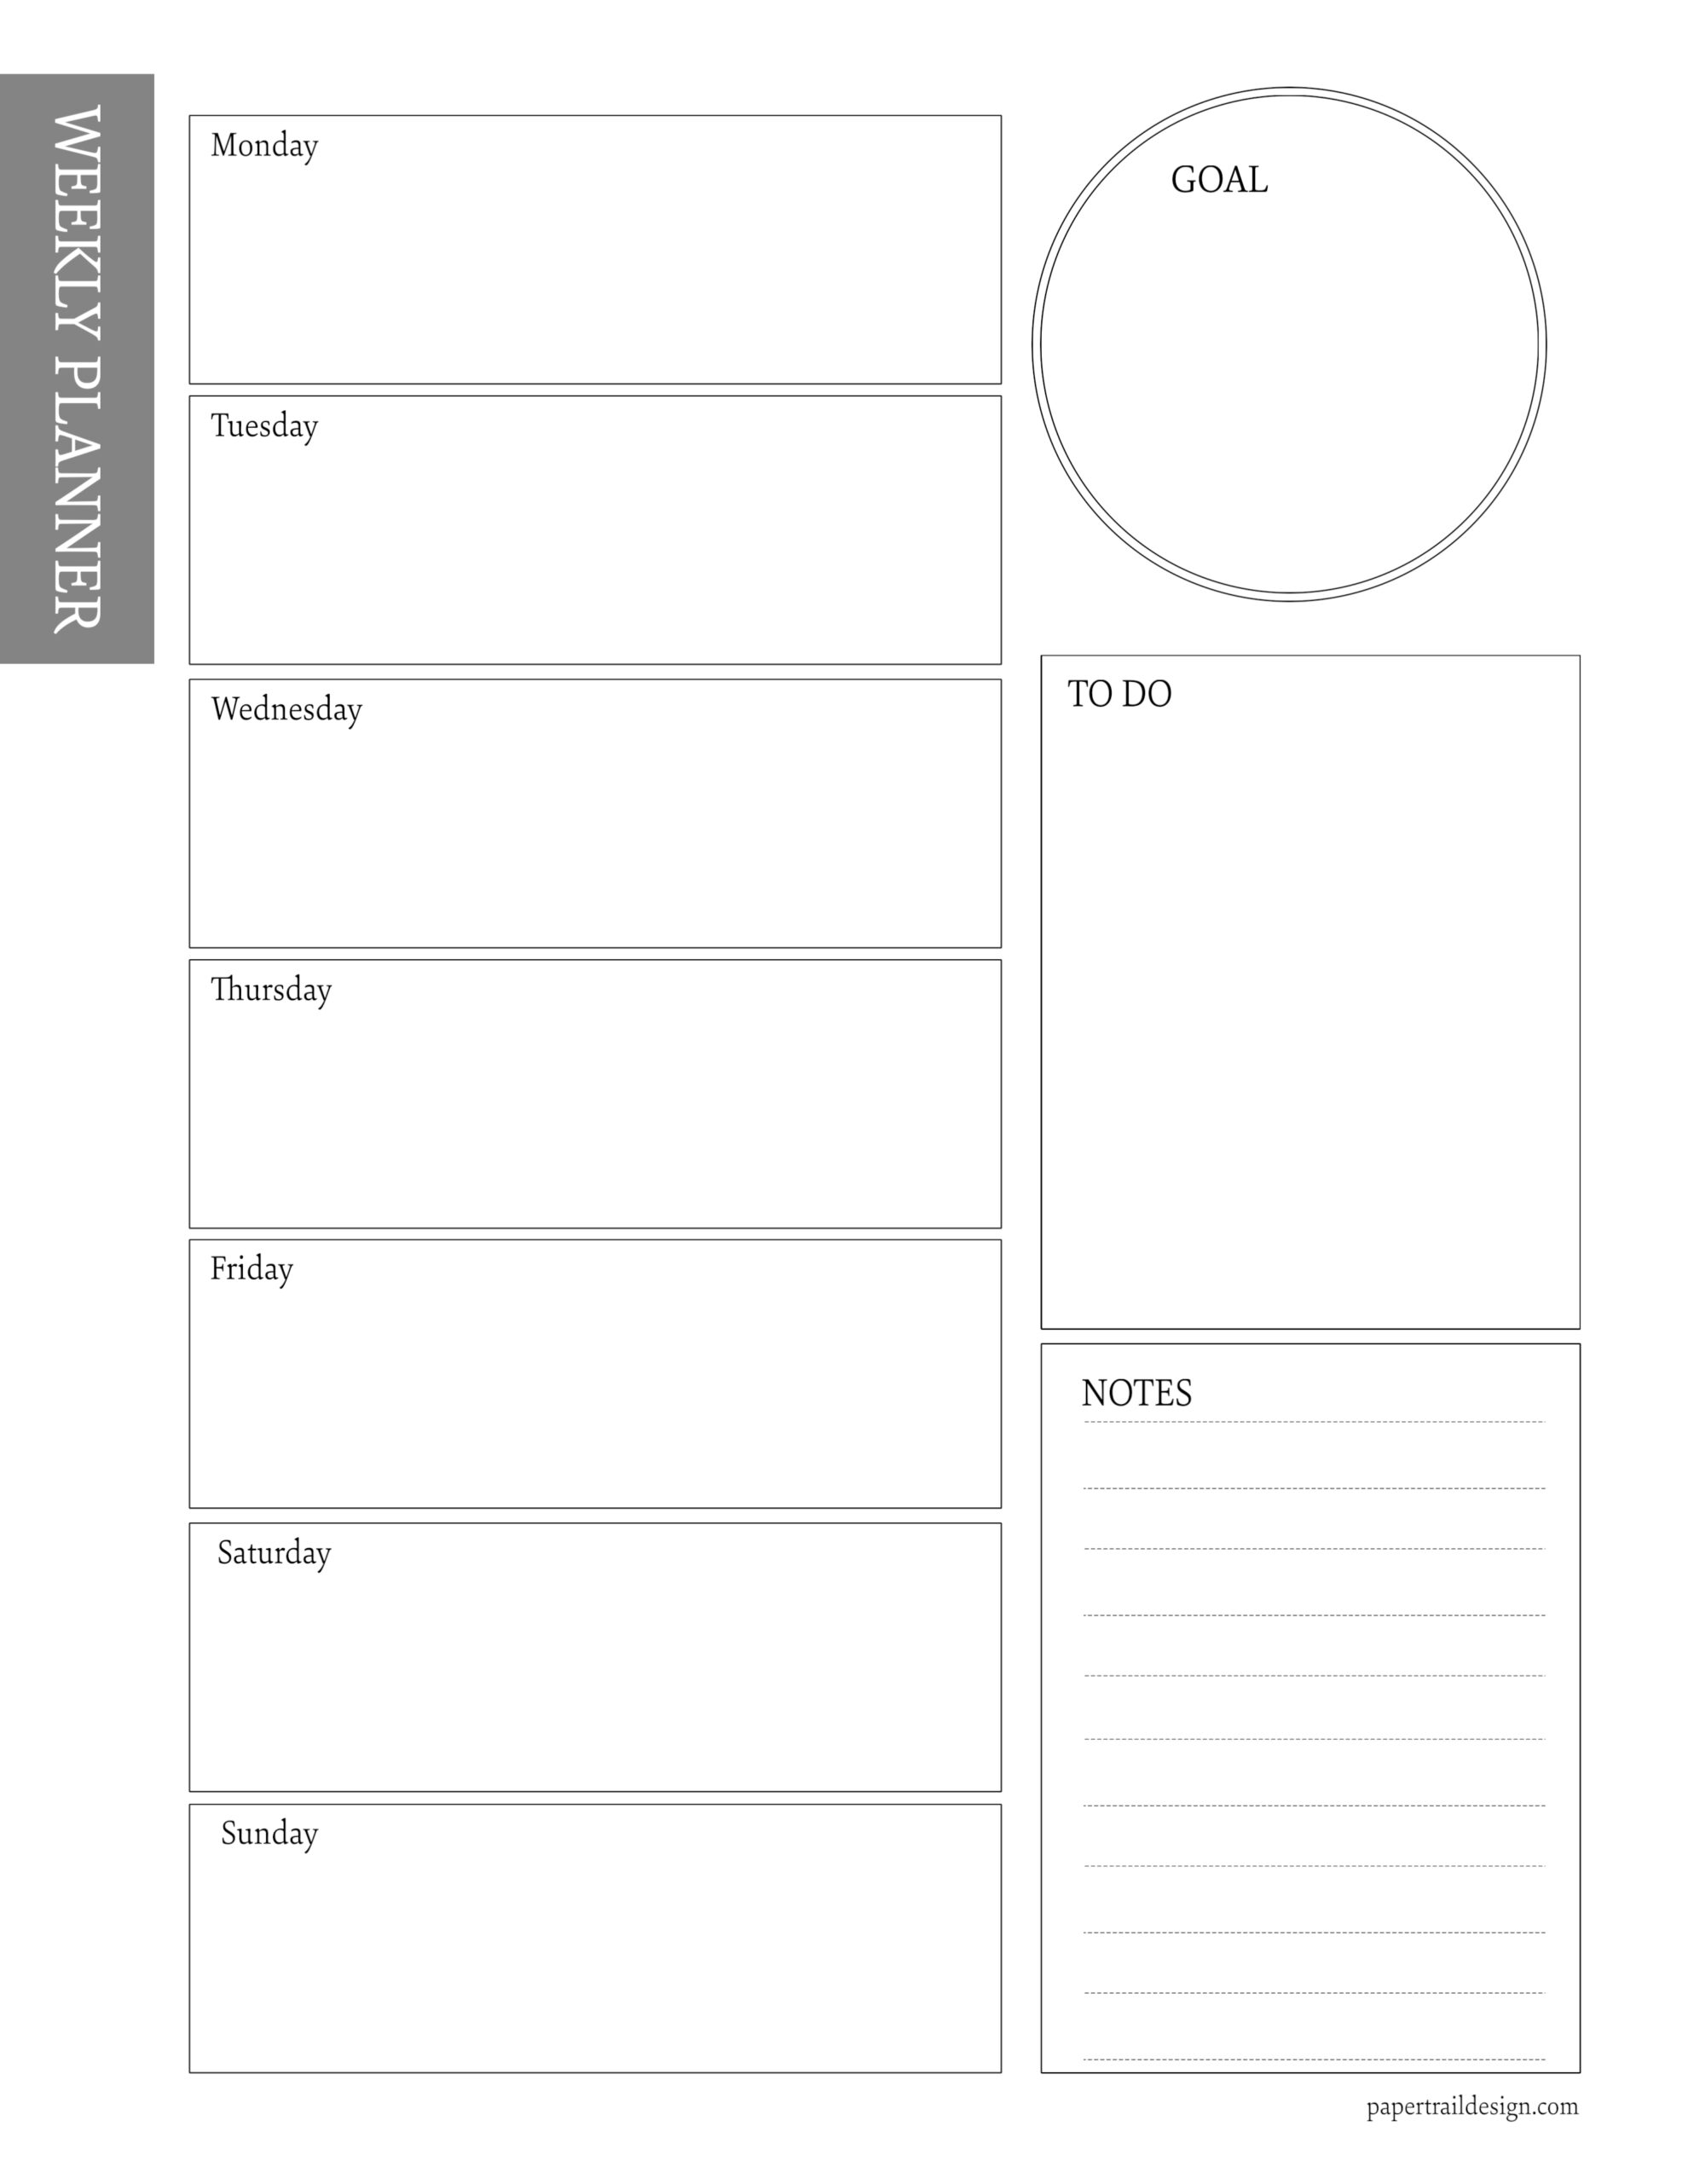 free-weekly-planner-printable-template-paper-trail-design